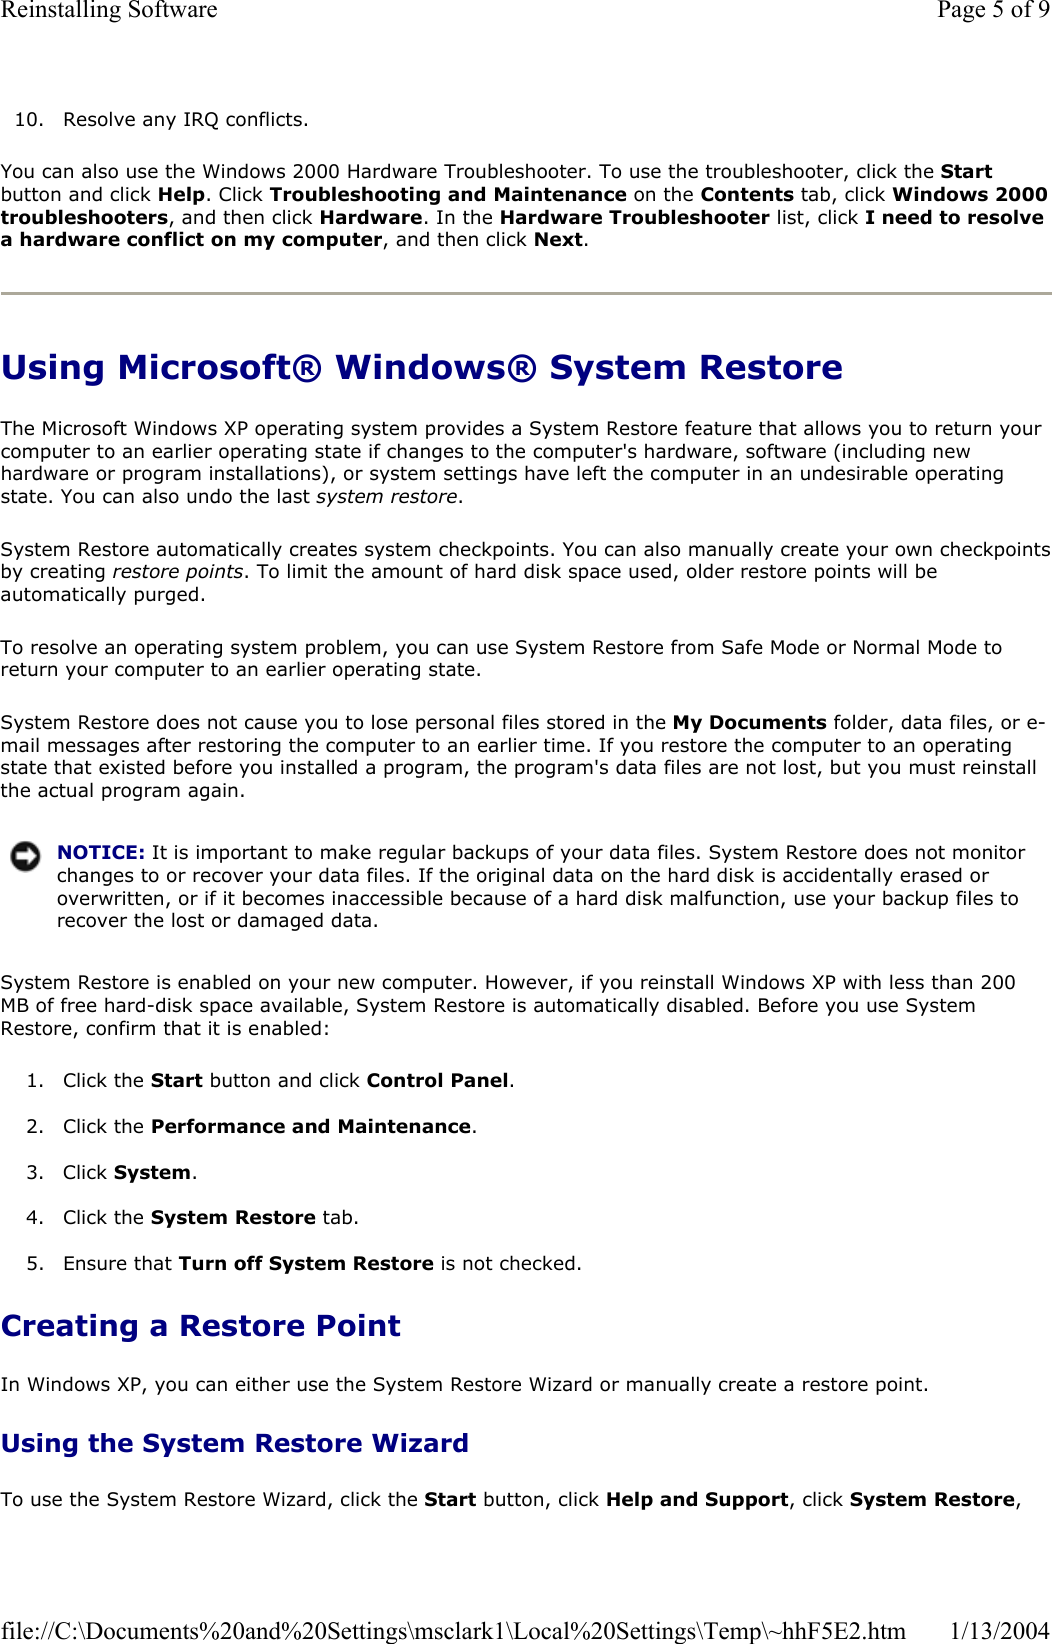 10. Resolve any IRQ conflicts. You can also use the Windows 2000 Hardware Troubleshooter. To use the troubleshooter, click the Startbutton and click Help. Click Troubleshooting and Maintenance on the Contents tab, click Windows 2000troubleshooters, and then click Hardware. In the Hardware Troubleshooter list, click I need to resolve a hardware conflict on my computer, and then click Next.Using Microsoft® Windows® System Restore The Microsoft Windows XP operating system provides a System Restore feature that allows you to return your computer to an earlier operating state if changes to the computer&apos;s hardware, software (including new hardware or program installations), or system settings have left the computer in an undesirable operating state. You can also undo the last system restore.System Restore automatically creates system checkpoints. You can also manually create your own checkpointsby creating restore points. To limit the amount of hard disk space used, older restore points will be automatically purged. To resolve an operating system problem, you can use System Restore from Safe Mode or Normal Mode to return your computer to an earlier operating state. System Restore does not cause you to lose personal files stored in the My Documents folder, data files, or e-mail messages after restoring the computer to an earlier time. If you restore the computer to an operating state that existed before you installed a program, the program&apos;s data files are not lost, but you must reinstall the actual program again.System Restore is enabled on your new computer. However, if you reinstall Windows XP with less than 200 MB of free hard-disk space available, System Restore is automatically disabled. Before you use System Restore, confirm that it is enabled: 1. Click the Start button and click Control Panel.2. Click the Performance and Maintenance.3. Click System.4. Click the System Restore tab. 5. Ensure that Turn off System Restore is not checked.  Creating a Restore Point In Windows XP, you can either use the System Restore Wizard or manually create a restore point. Using the System Restore Wizard To use the System Restore Wizard, click the Start button, click Help and Support, click System Restore,NOTICE: It is important to make regular backups of your data files. System Restore does not monitor changes to or recover your data files. If the original data on the hard disk is accidentally erased or overwritten, or if it becomes inaccessible because of a hard disk malfunction, use your backup files to recover the lost or damaged data.Page 5 of 9Reinstalling Software1/13/2004file://C:\Documents%20and%20Settings\msclark1\Local%20Settings\Temp\~hhF5E2.htm